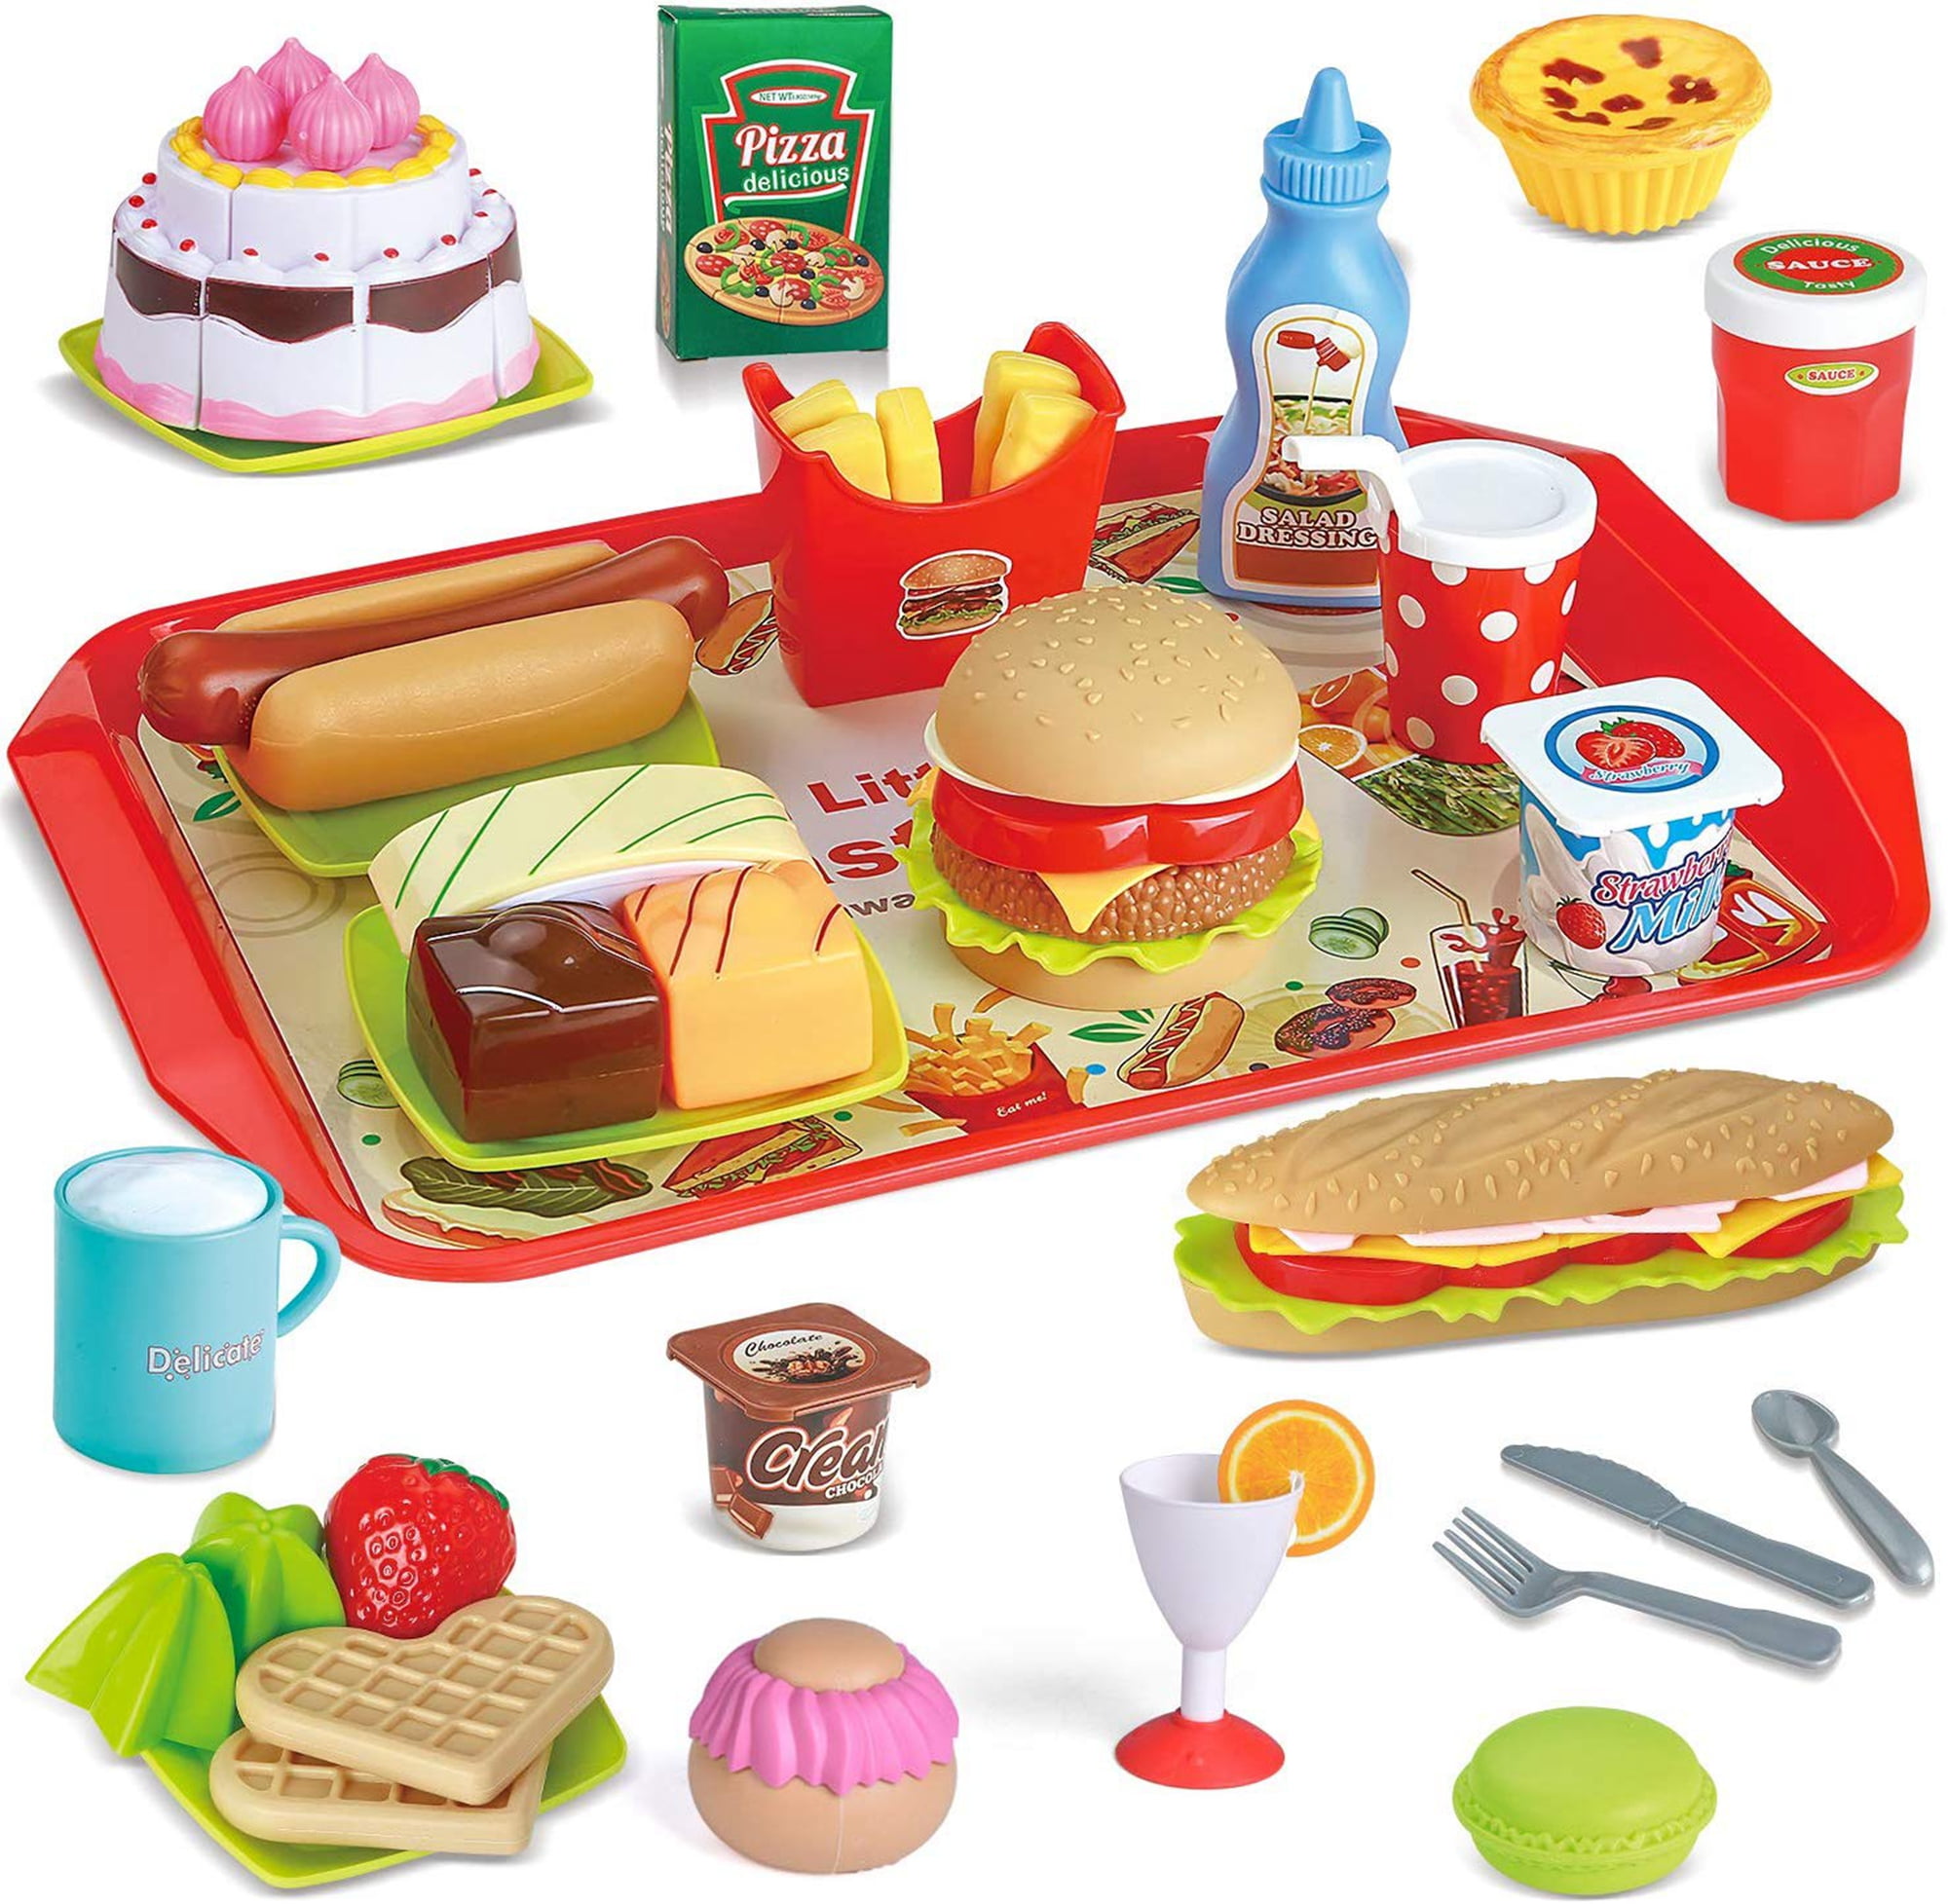 Fun Little Toys 49 PCs Play Food for Kids Kitchen, Toy Foods with Cutting Fruits, Cake and Fast